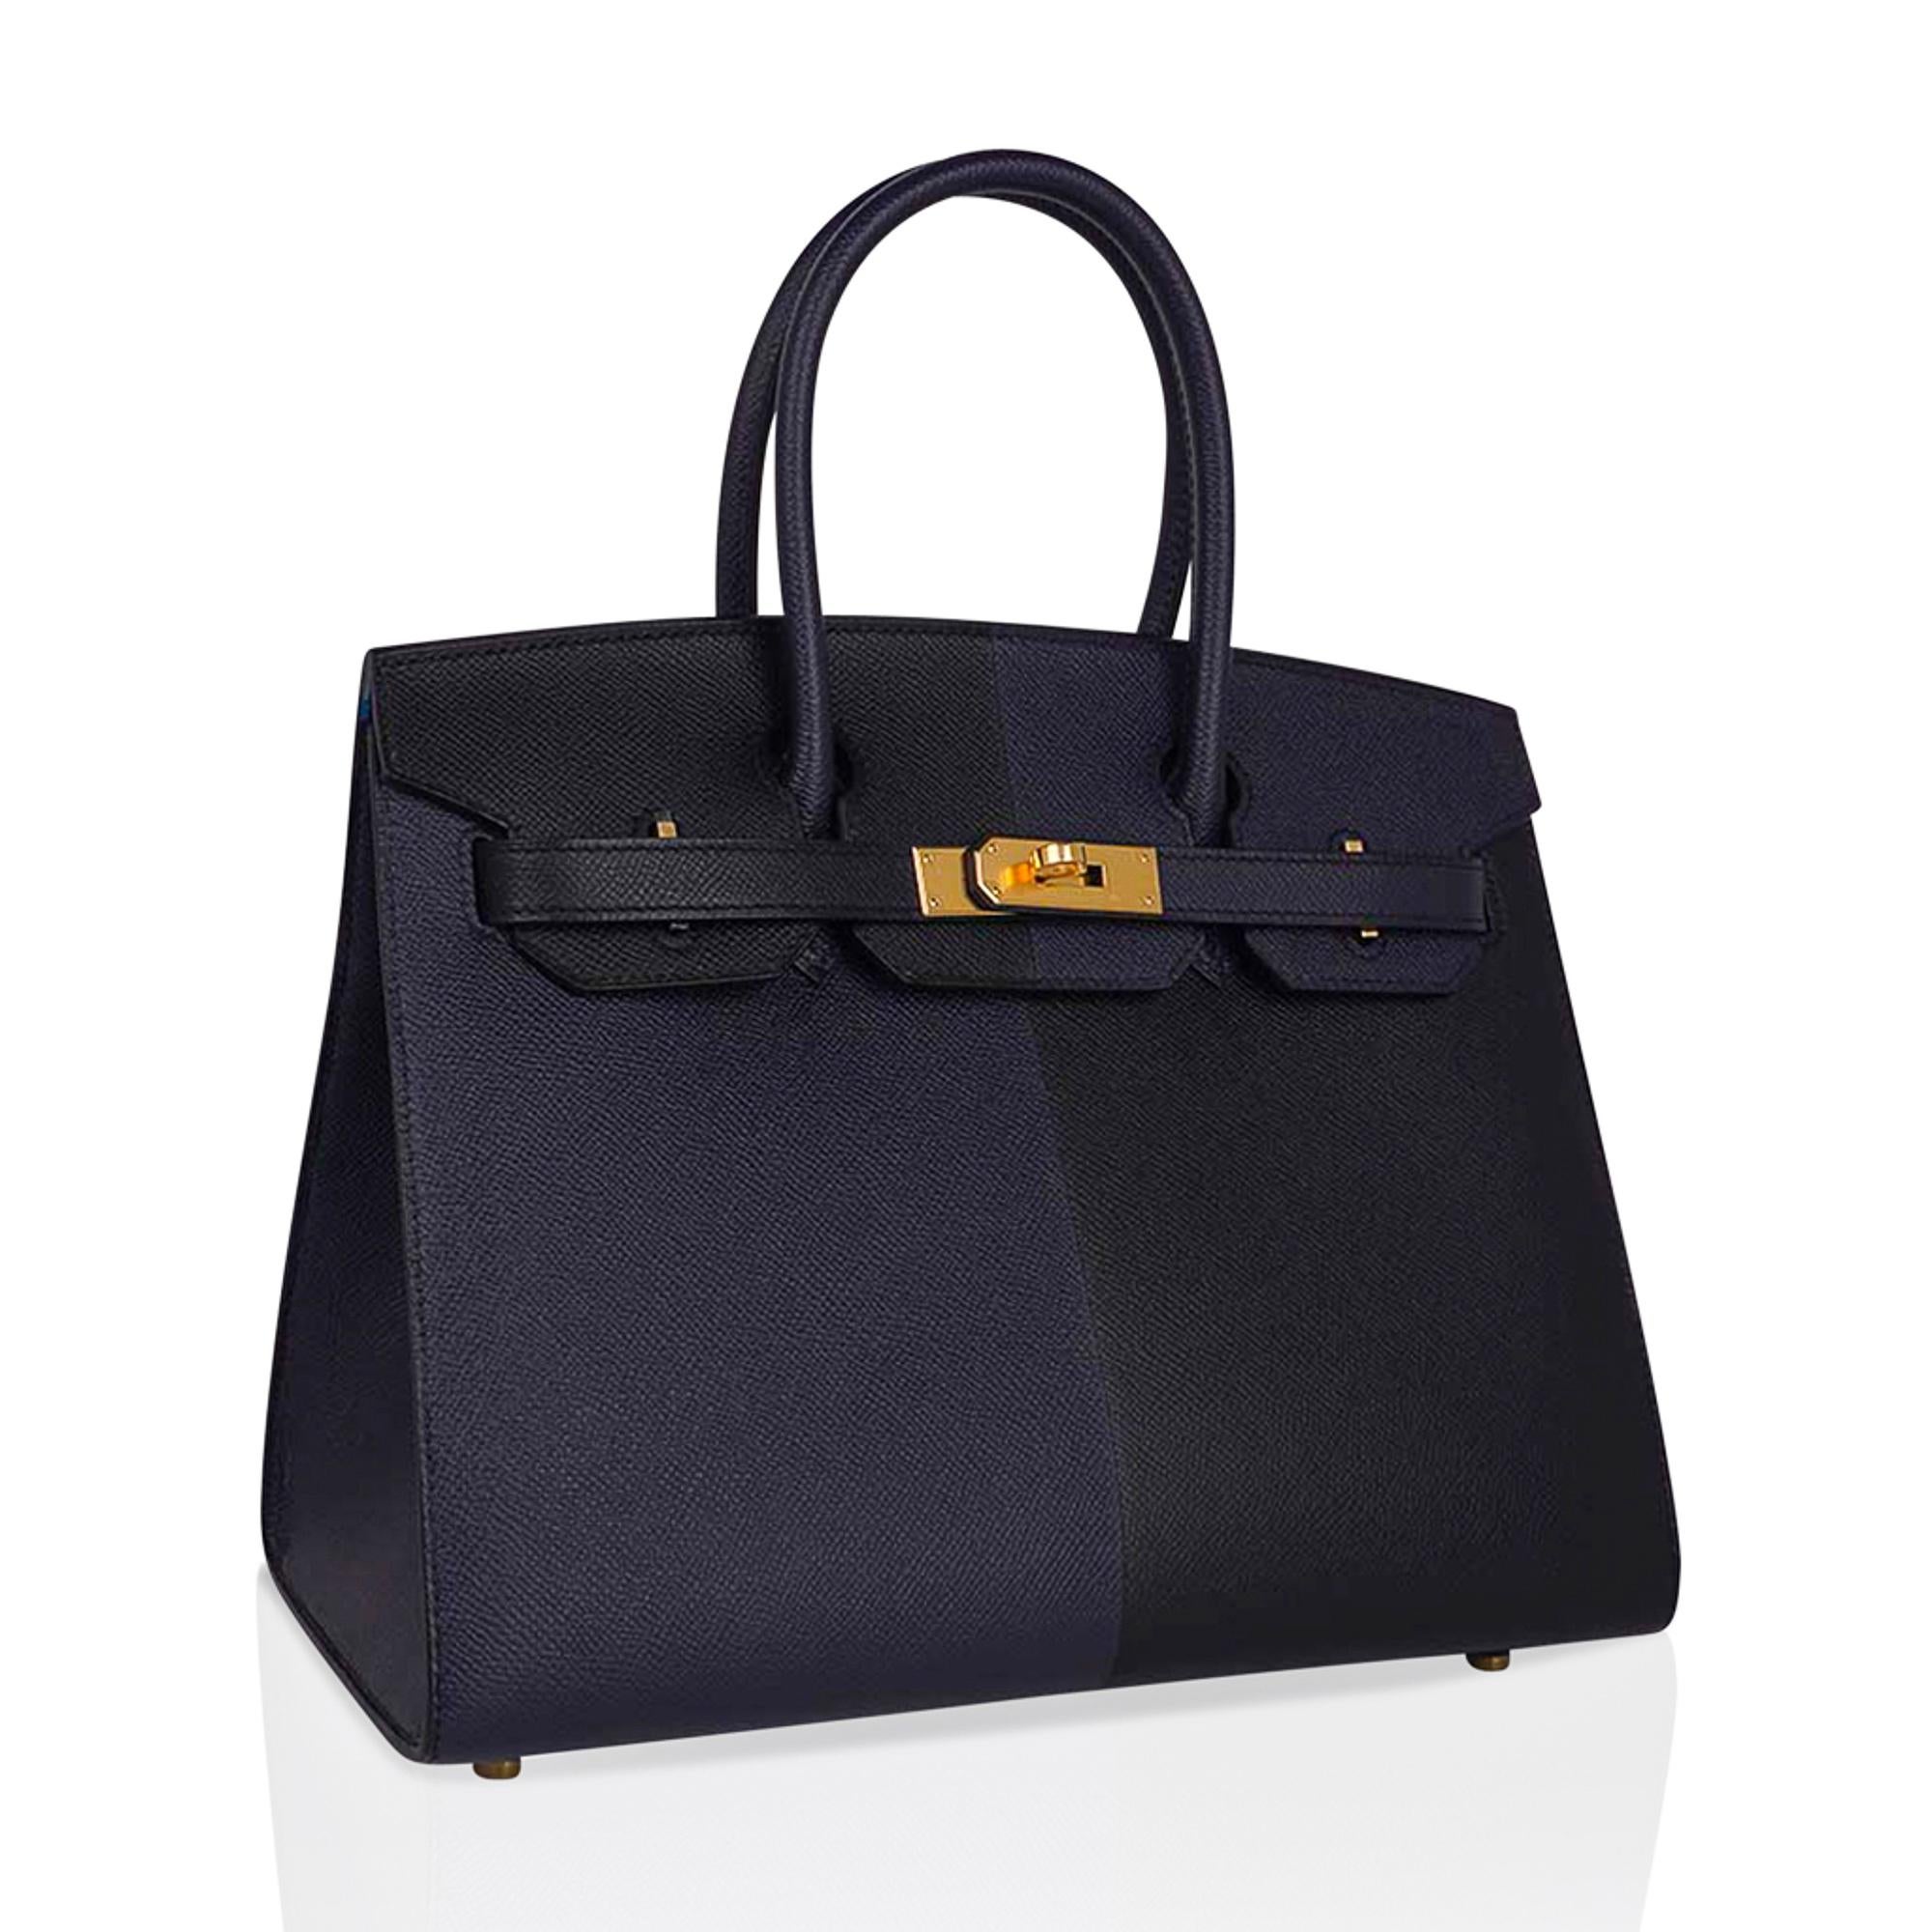 Mightychic offers a limited edition Hermes Birkin Sellier Casaque 30 tri-colour bag featured in Black and Blue Indigo.
Vivid Bleu Frida interior.
Beautiful and exotic, this epsom leather Hermes Birkin Sellier limited edition bag is perfect for year